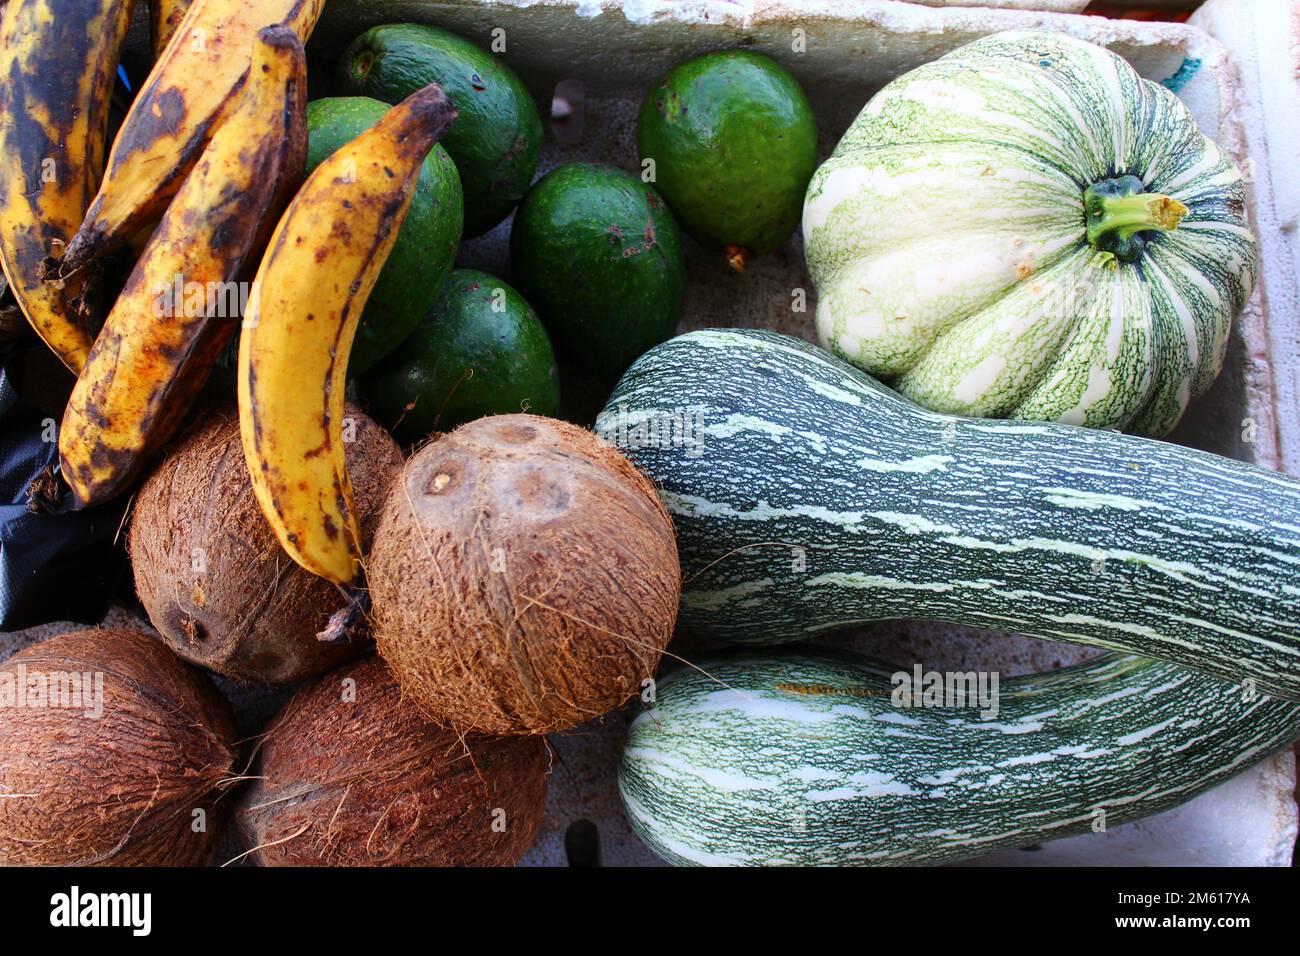 coconut, butter pear avocado and banana plantain on a market stall Stock Photo